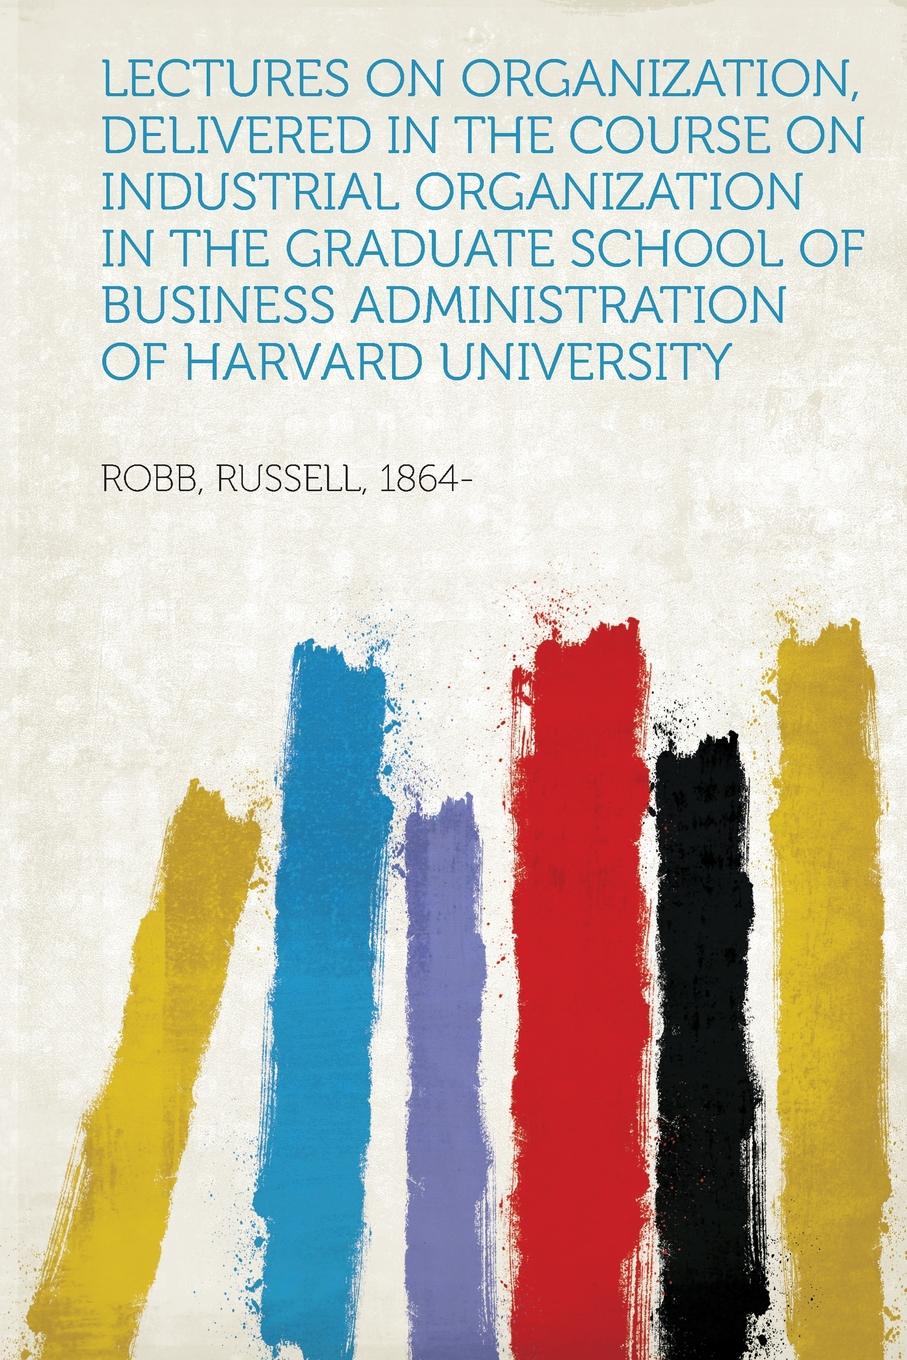 Lectures on Organization, Delivered in the Course on Industrial Organization in the Graduate School of Business Administration of Harvard University